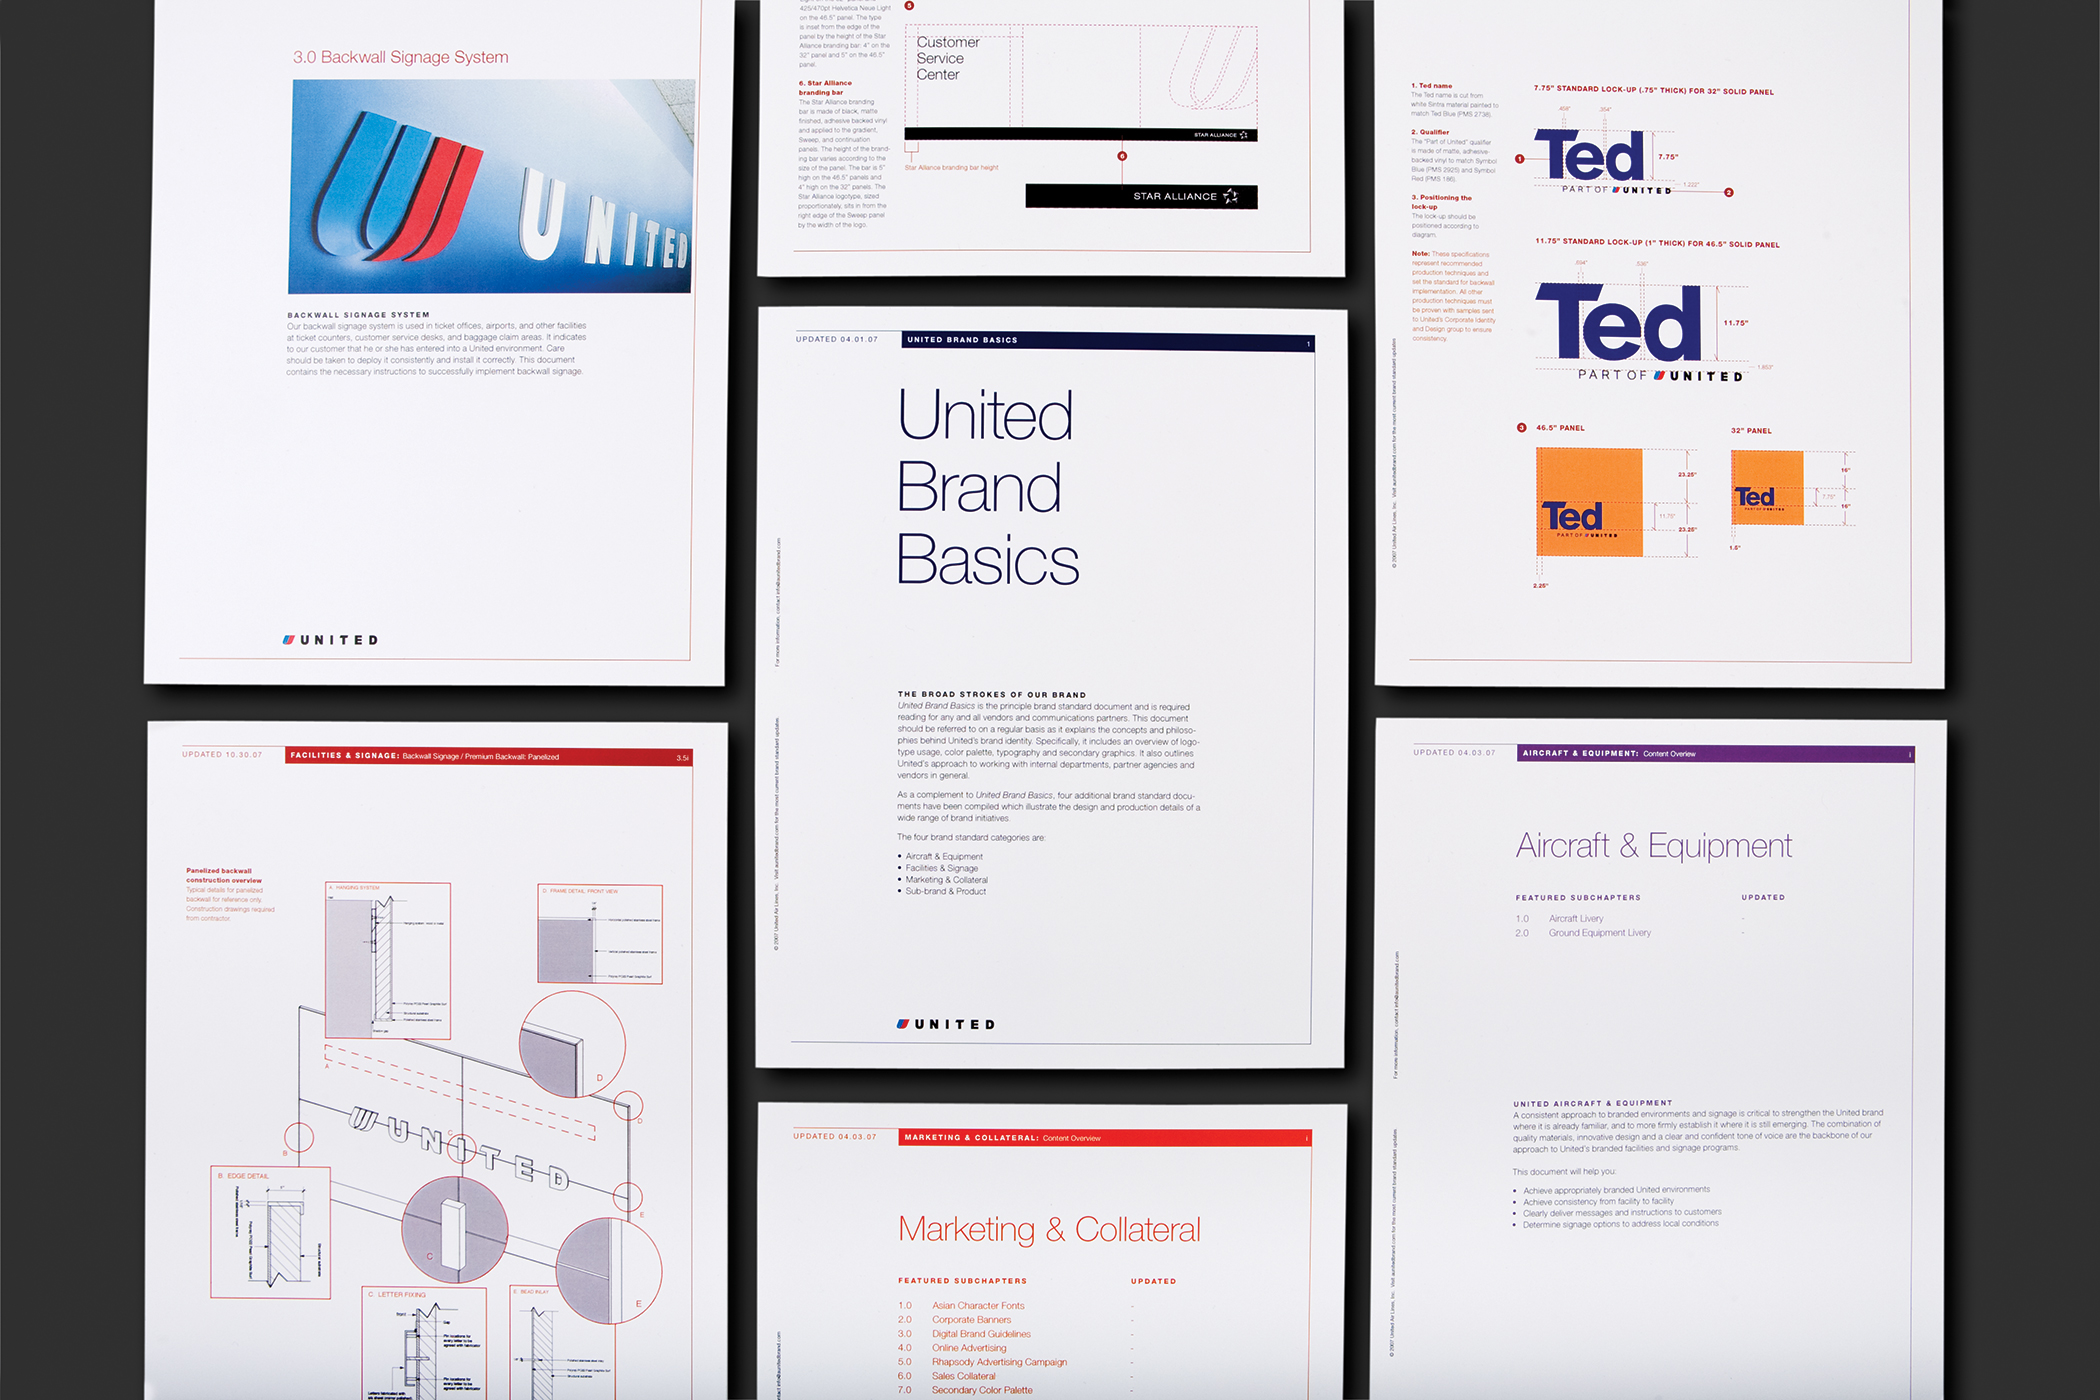 Grid of pages from United Airlines brand standards book, titled "United Brand Basics."